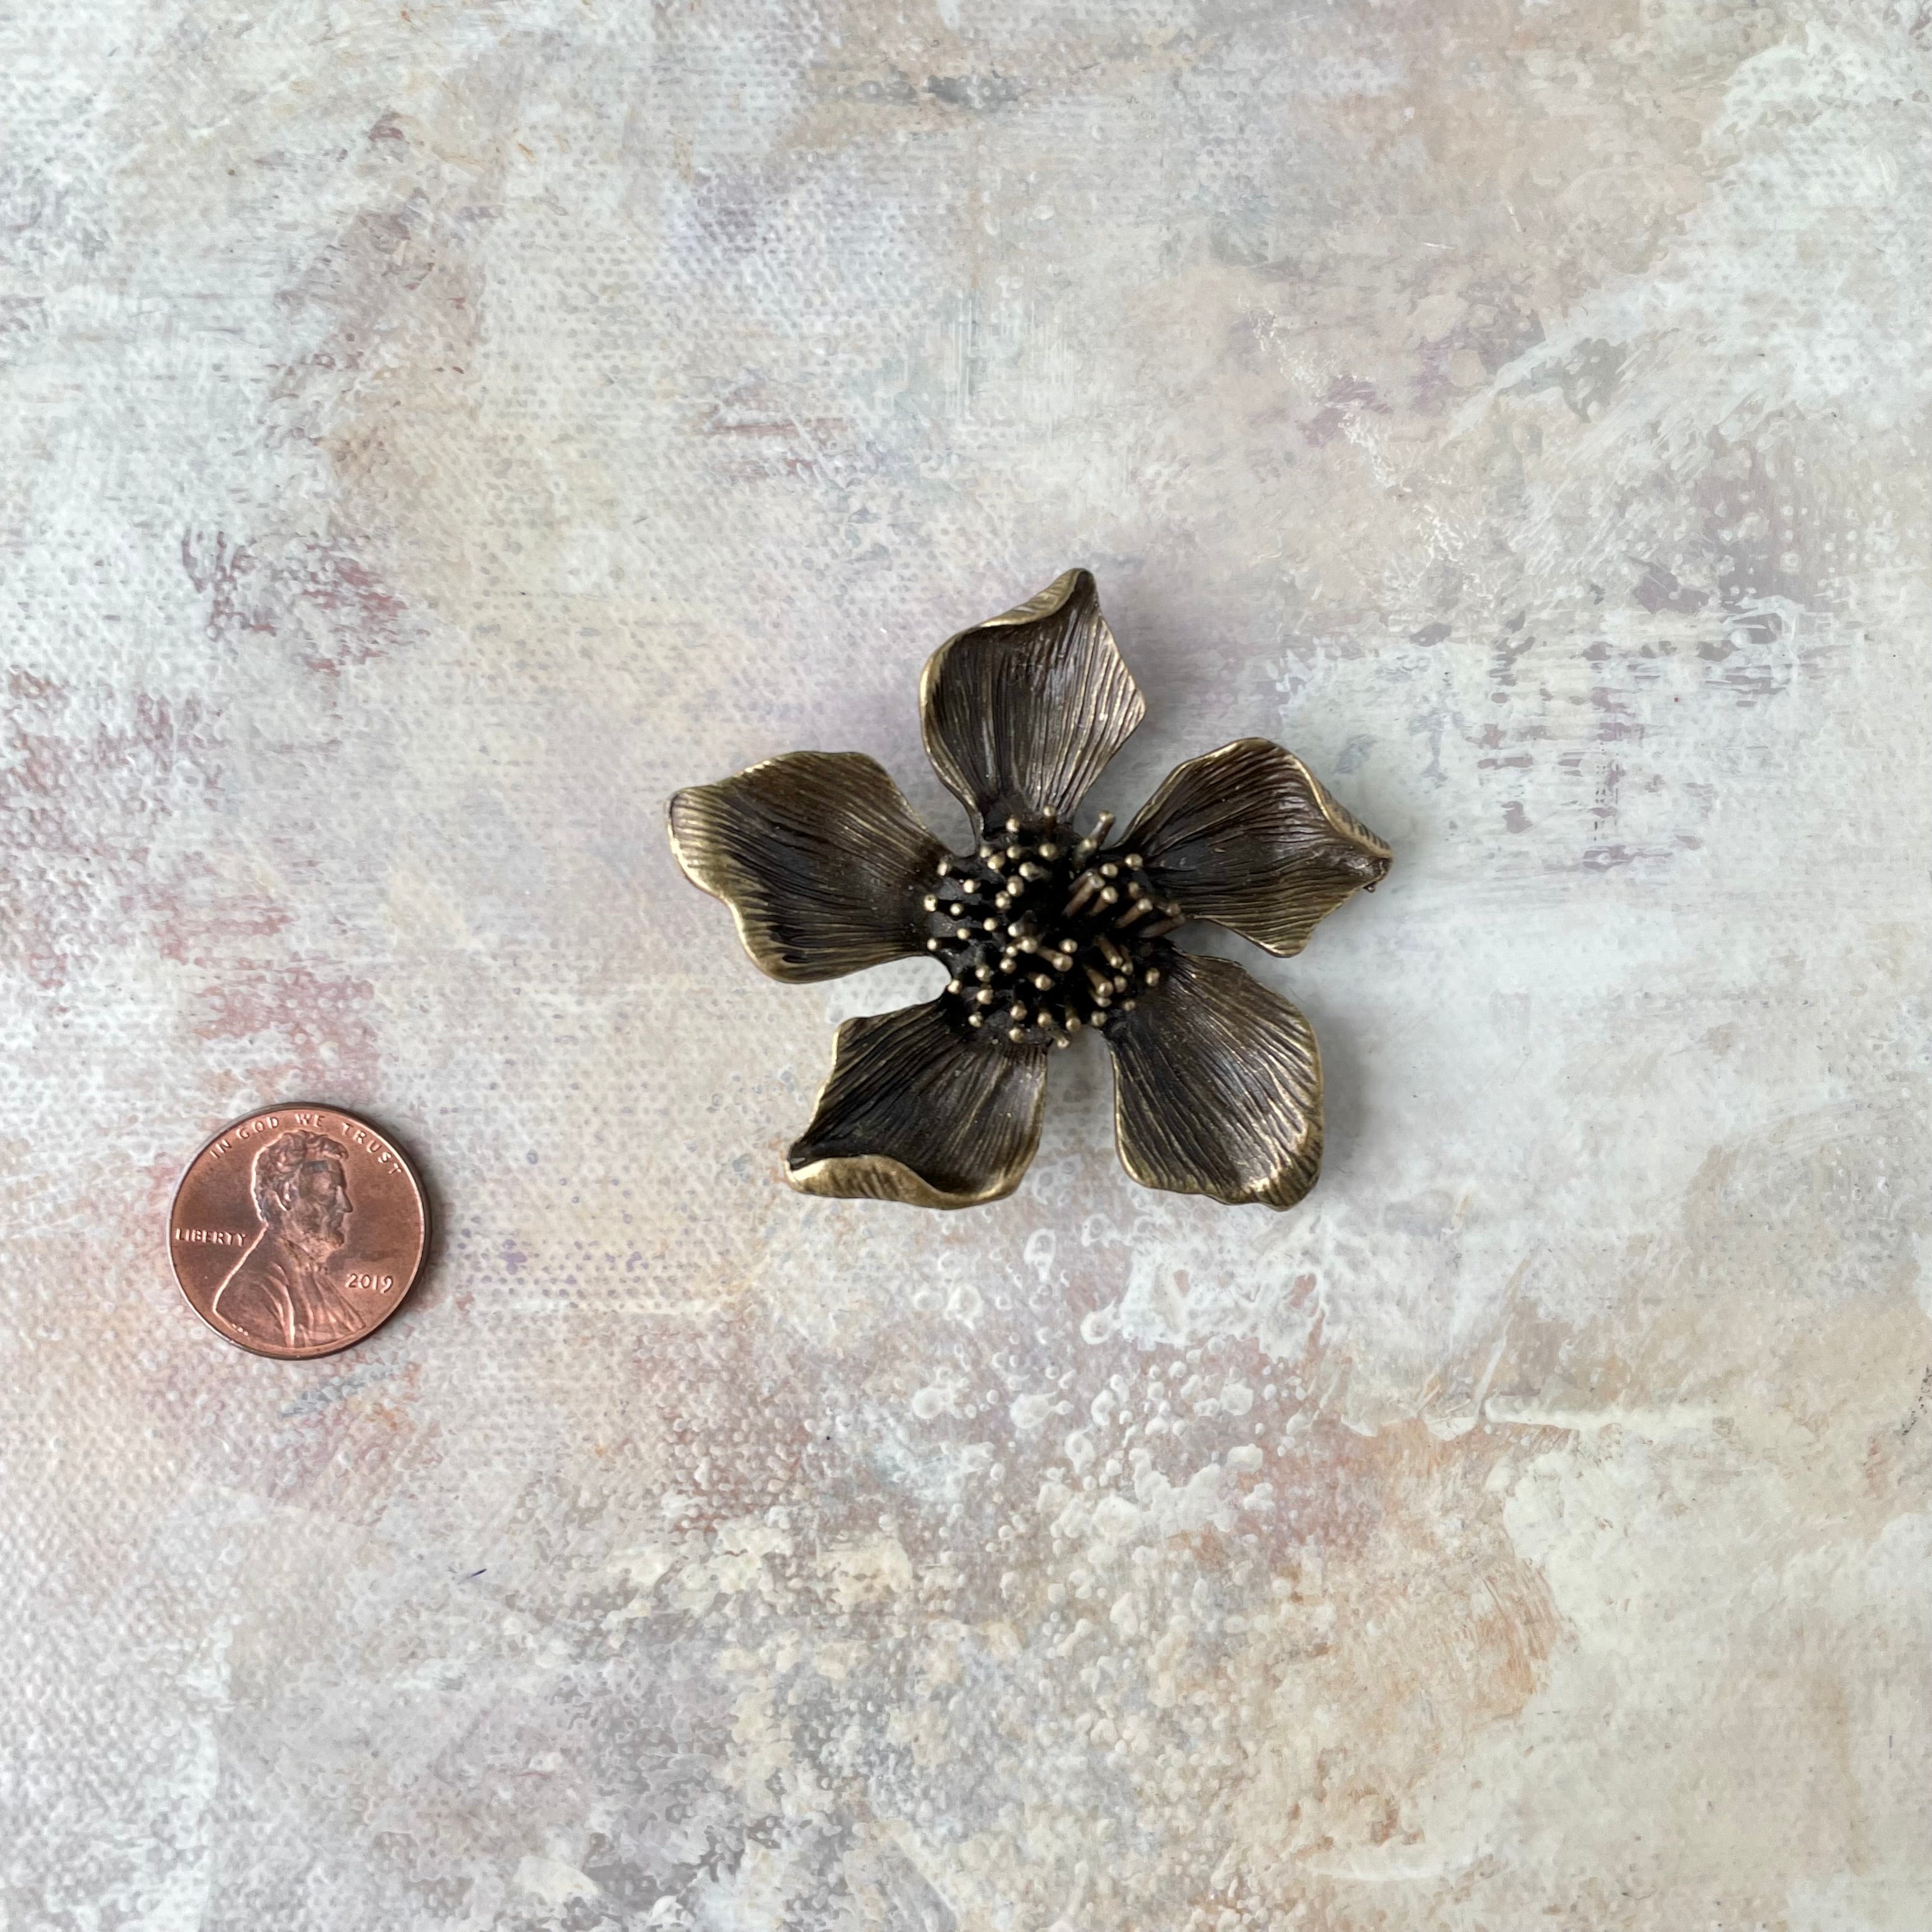 1 larger metal styling flower with penny beside for size reference - flat lay props from Champagne & GRIT